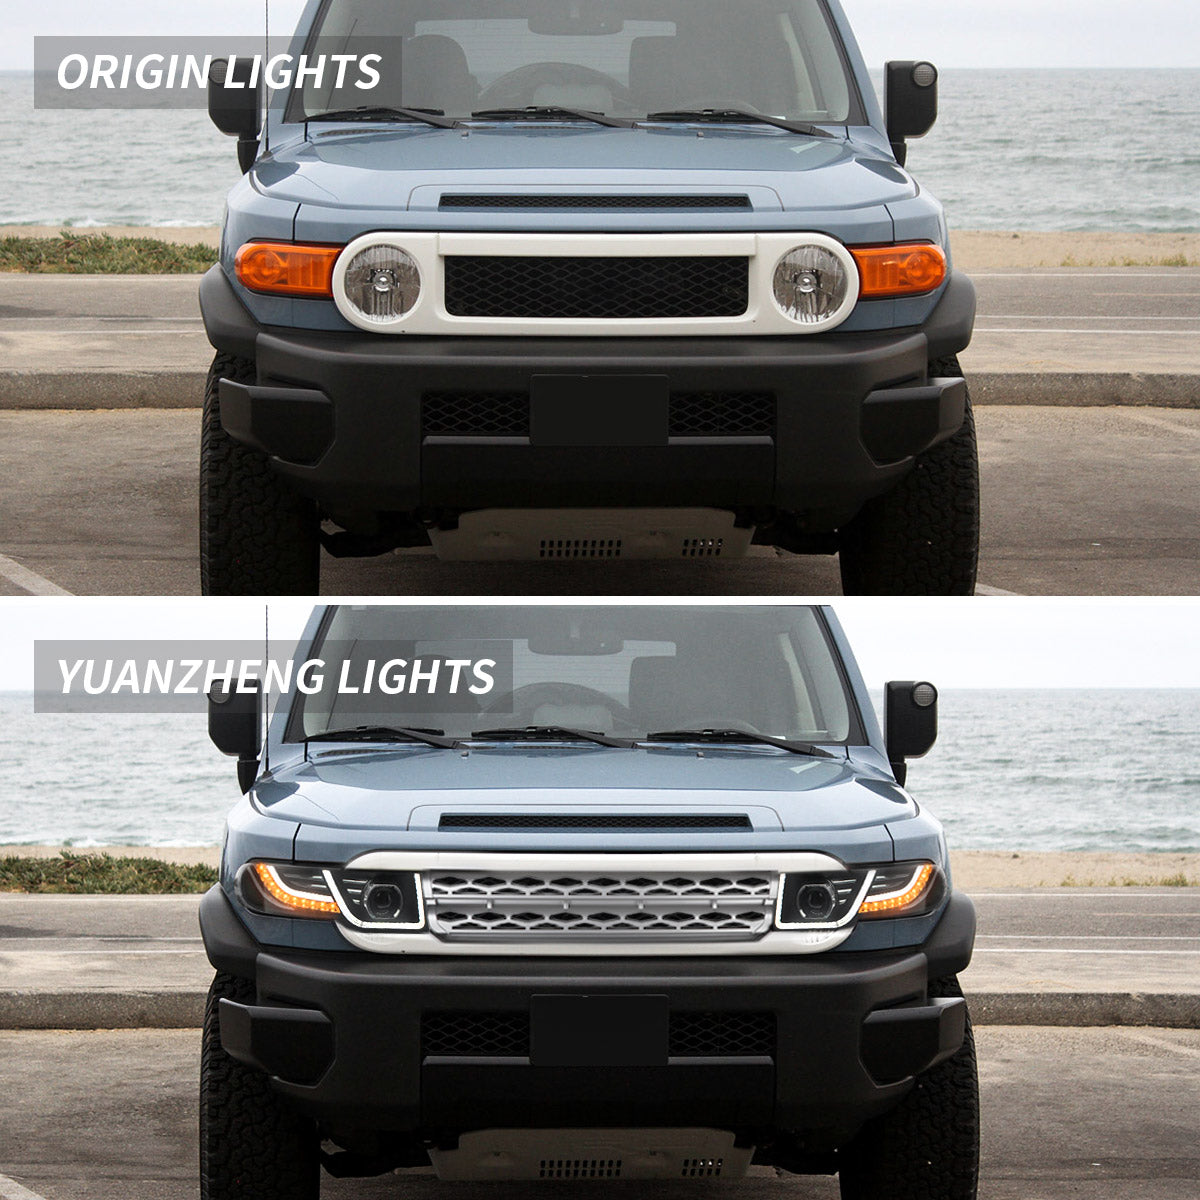 VLAND 07-15 Fj Cruiser LED Headlights With Grille (Bulbs Not Included)